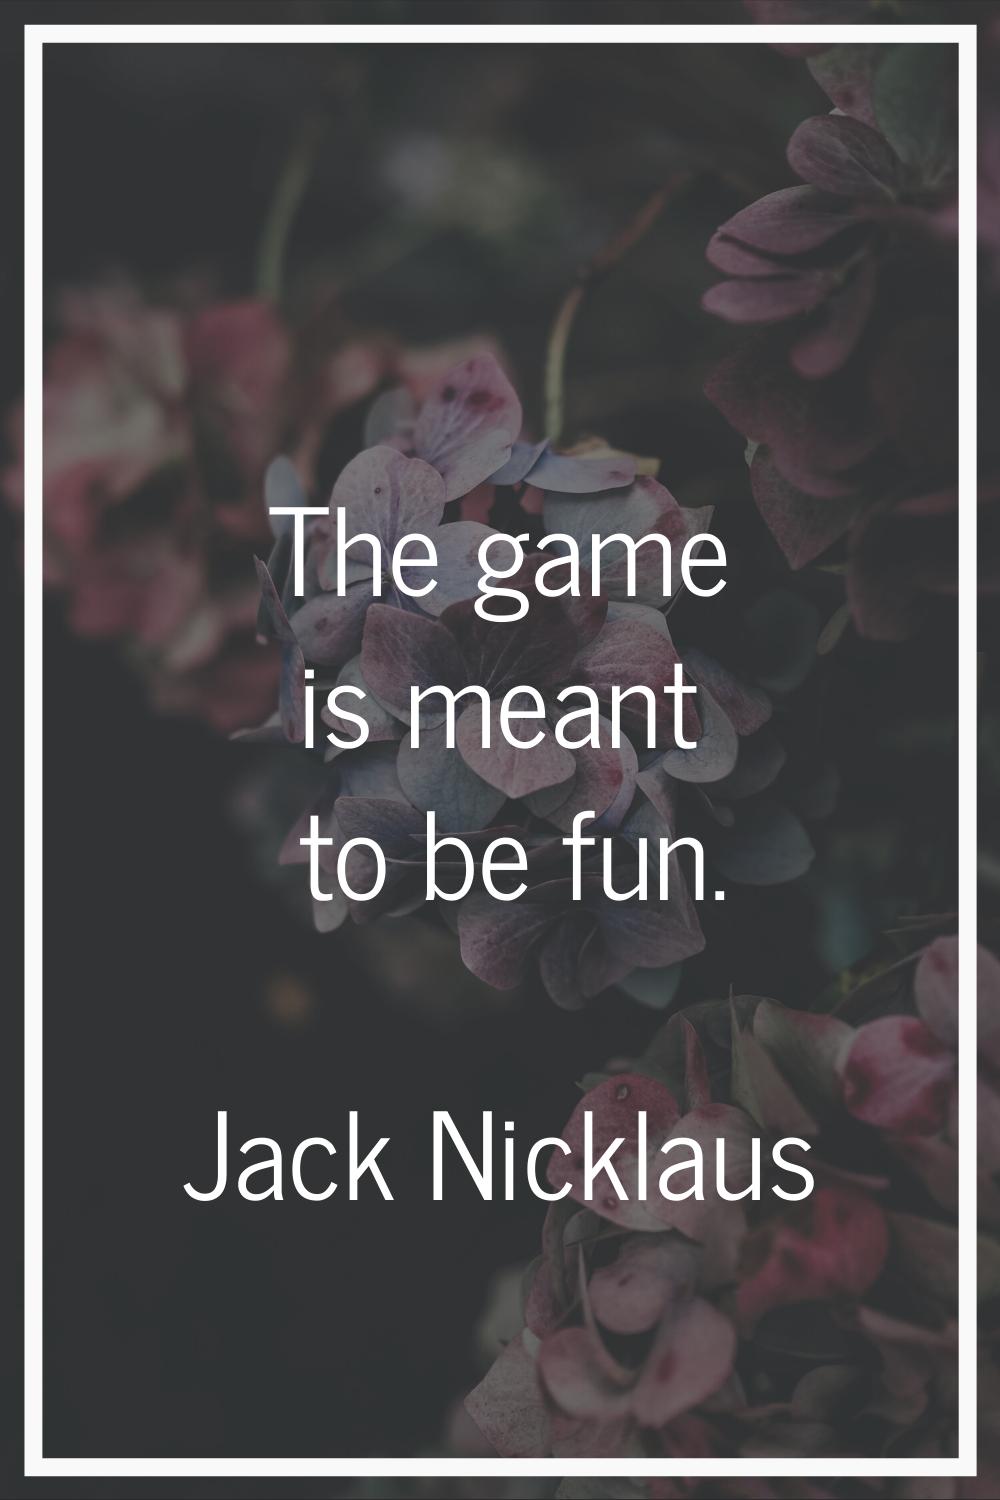 The game is meant to be fun.